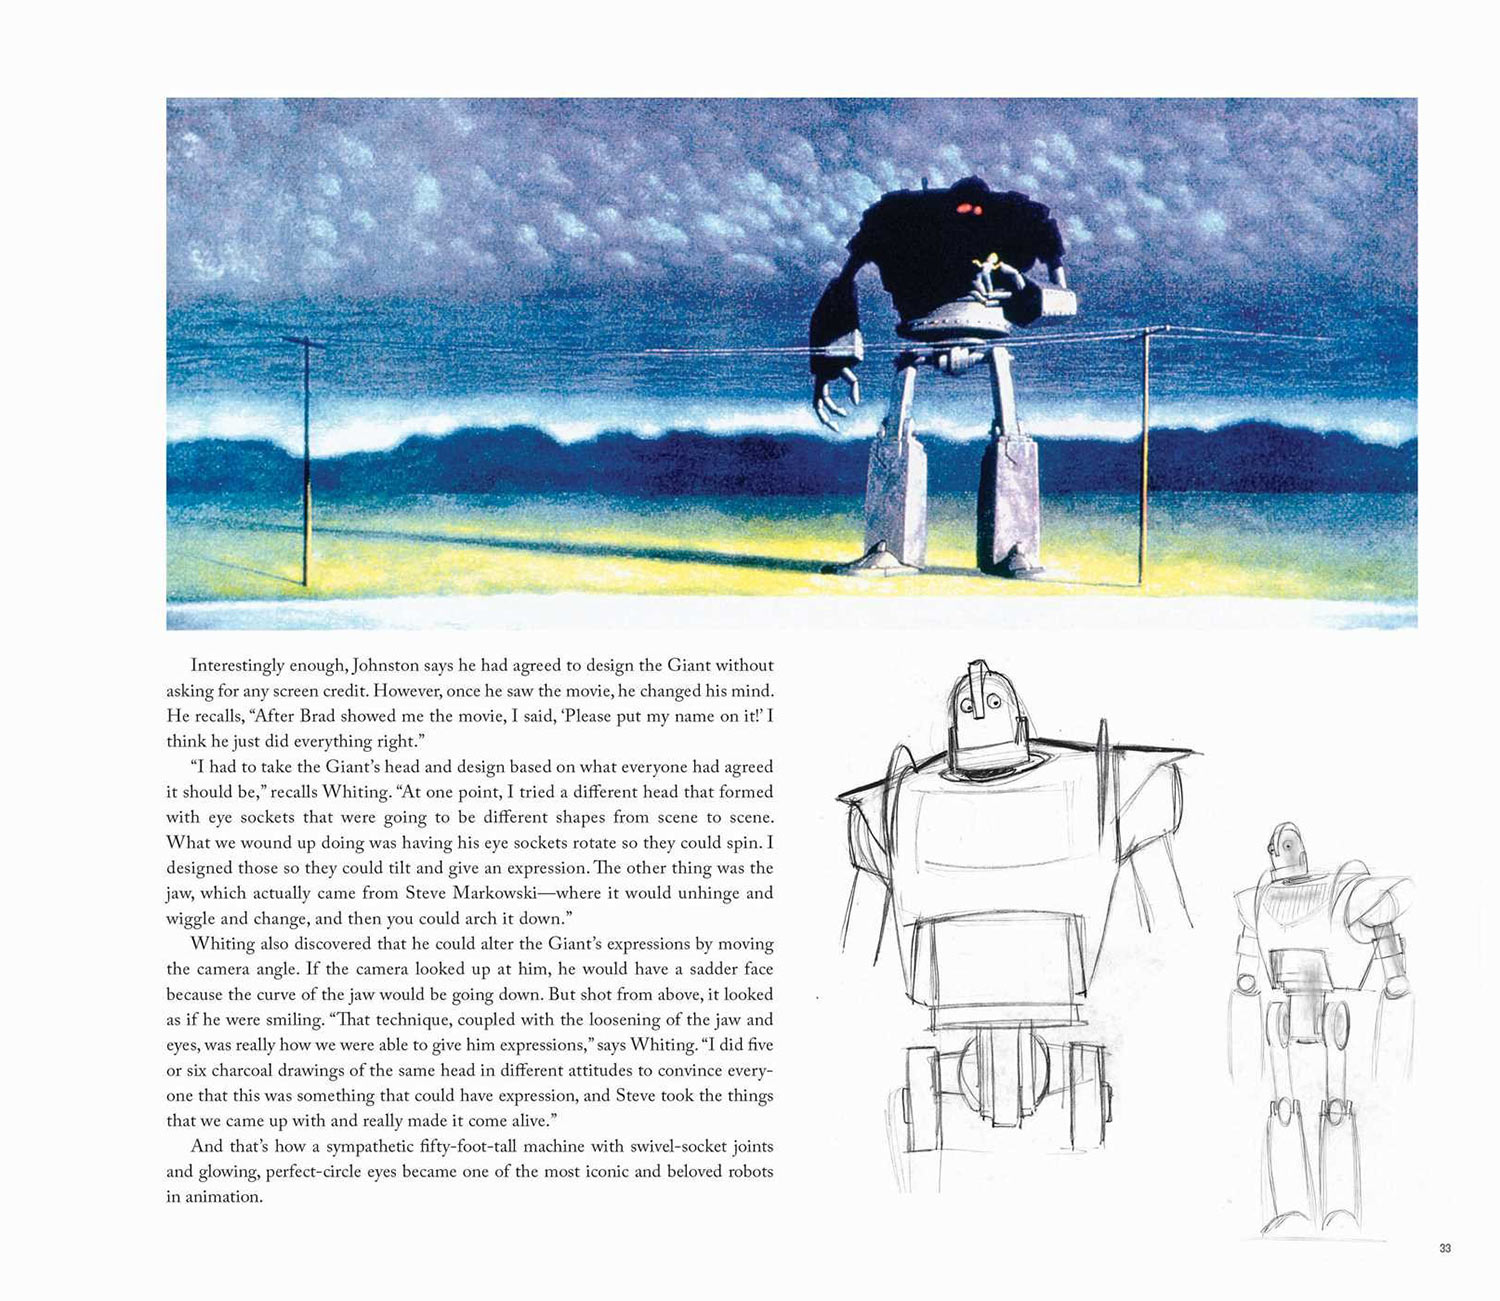 The Art of The Iron Giant